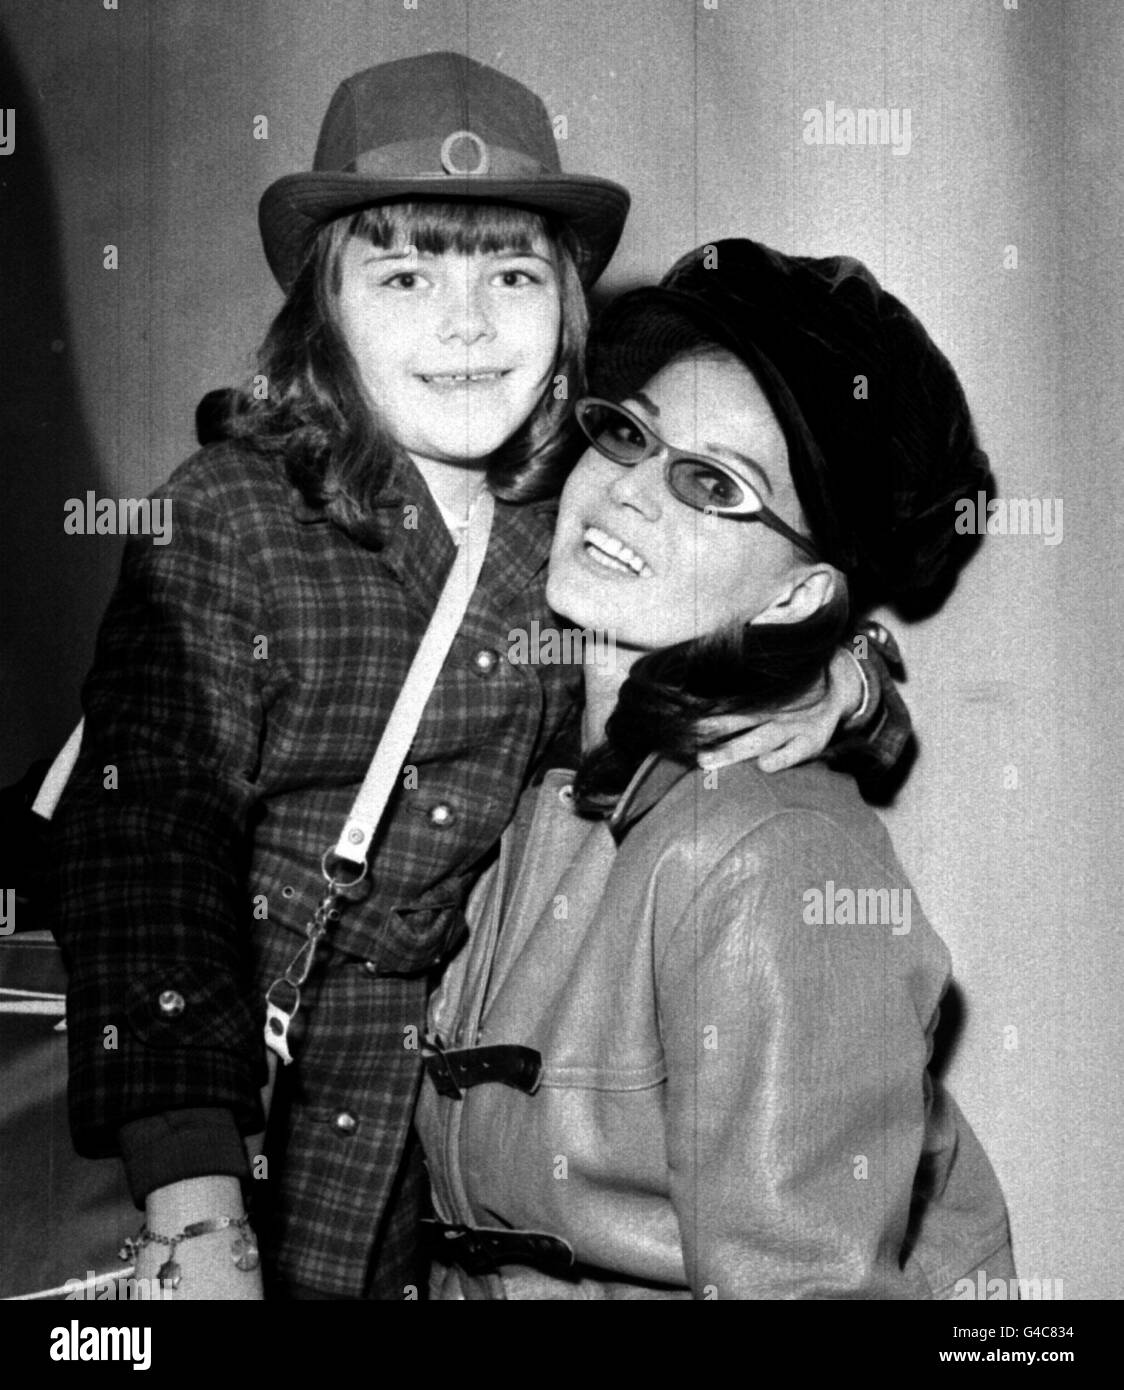 PA NEWS PHOTO 3/2/64 EVA BARTOK EMBRACES HER SIX YEAR OLD DAUGHTER DEANNA GRAZIA IN A REUNION AT HEATHROW AIRPORT, LONDON AFTER SHE RETURNED FROM A MONTH'S STAY IN ROME Stock Photo